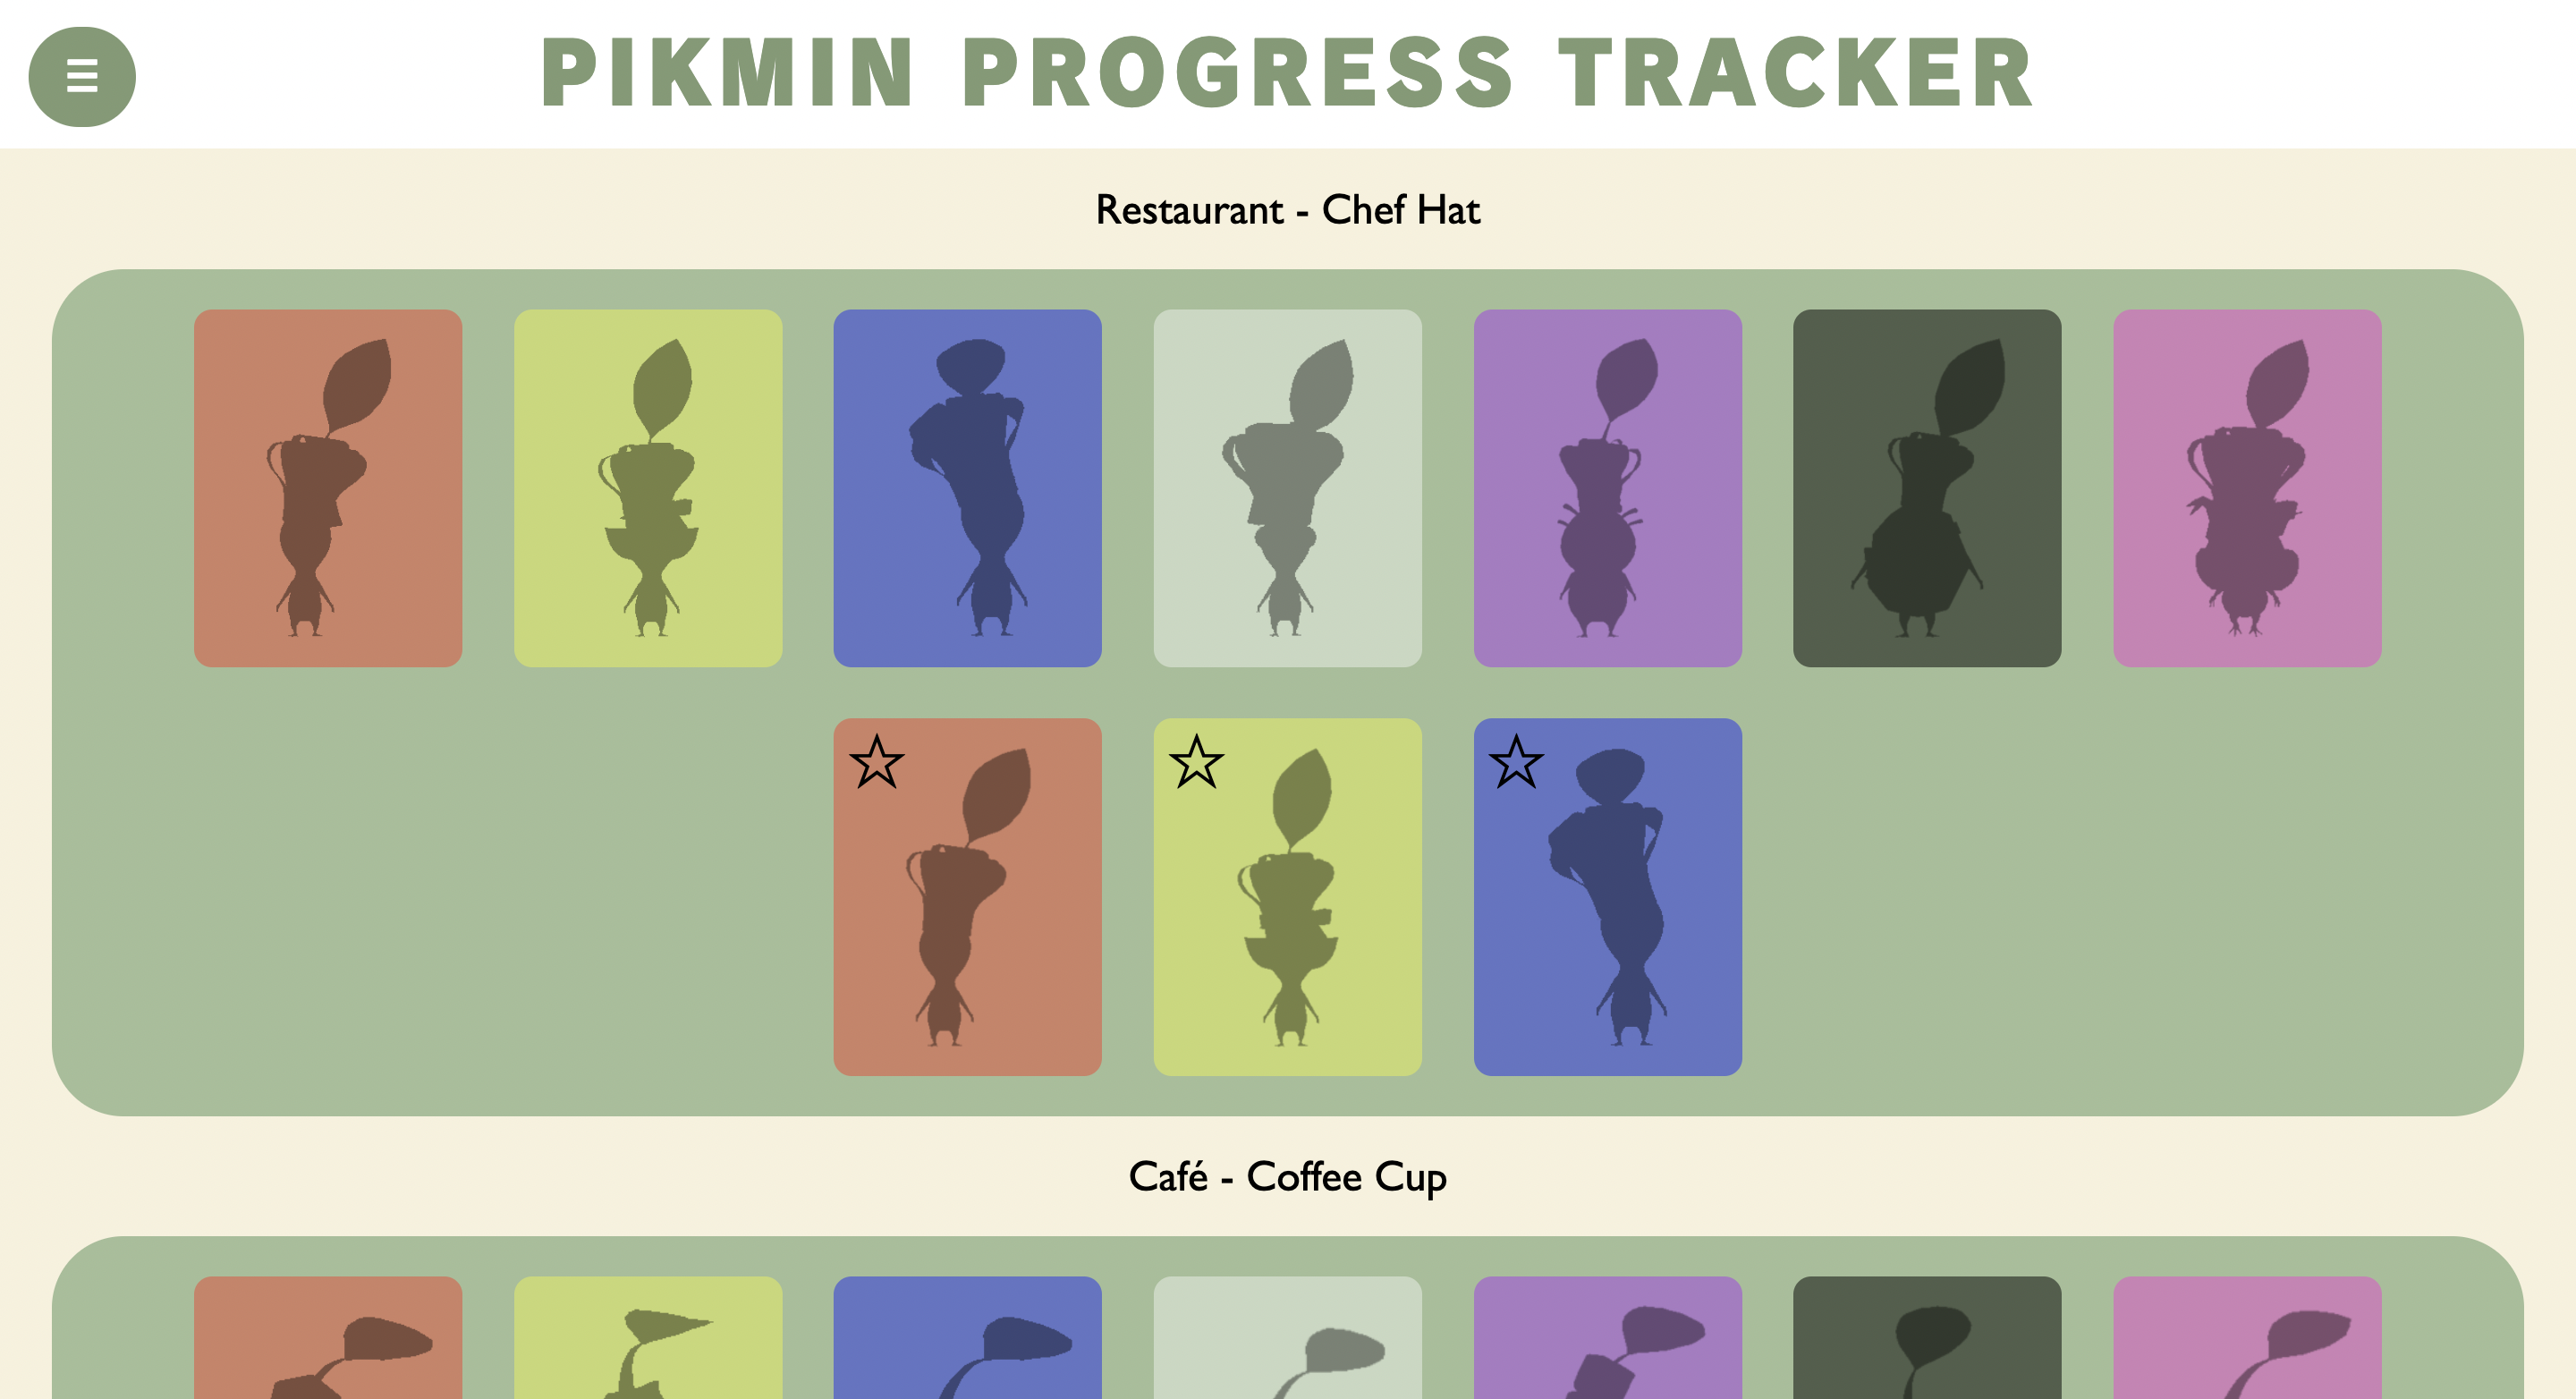 The home page of Pikmin Progress Tracker